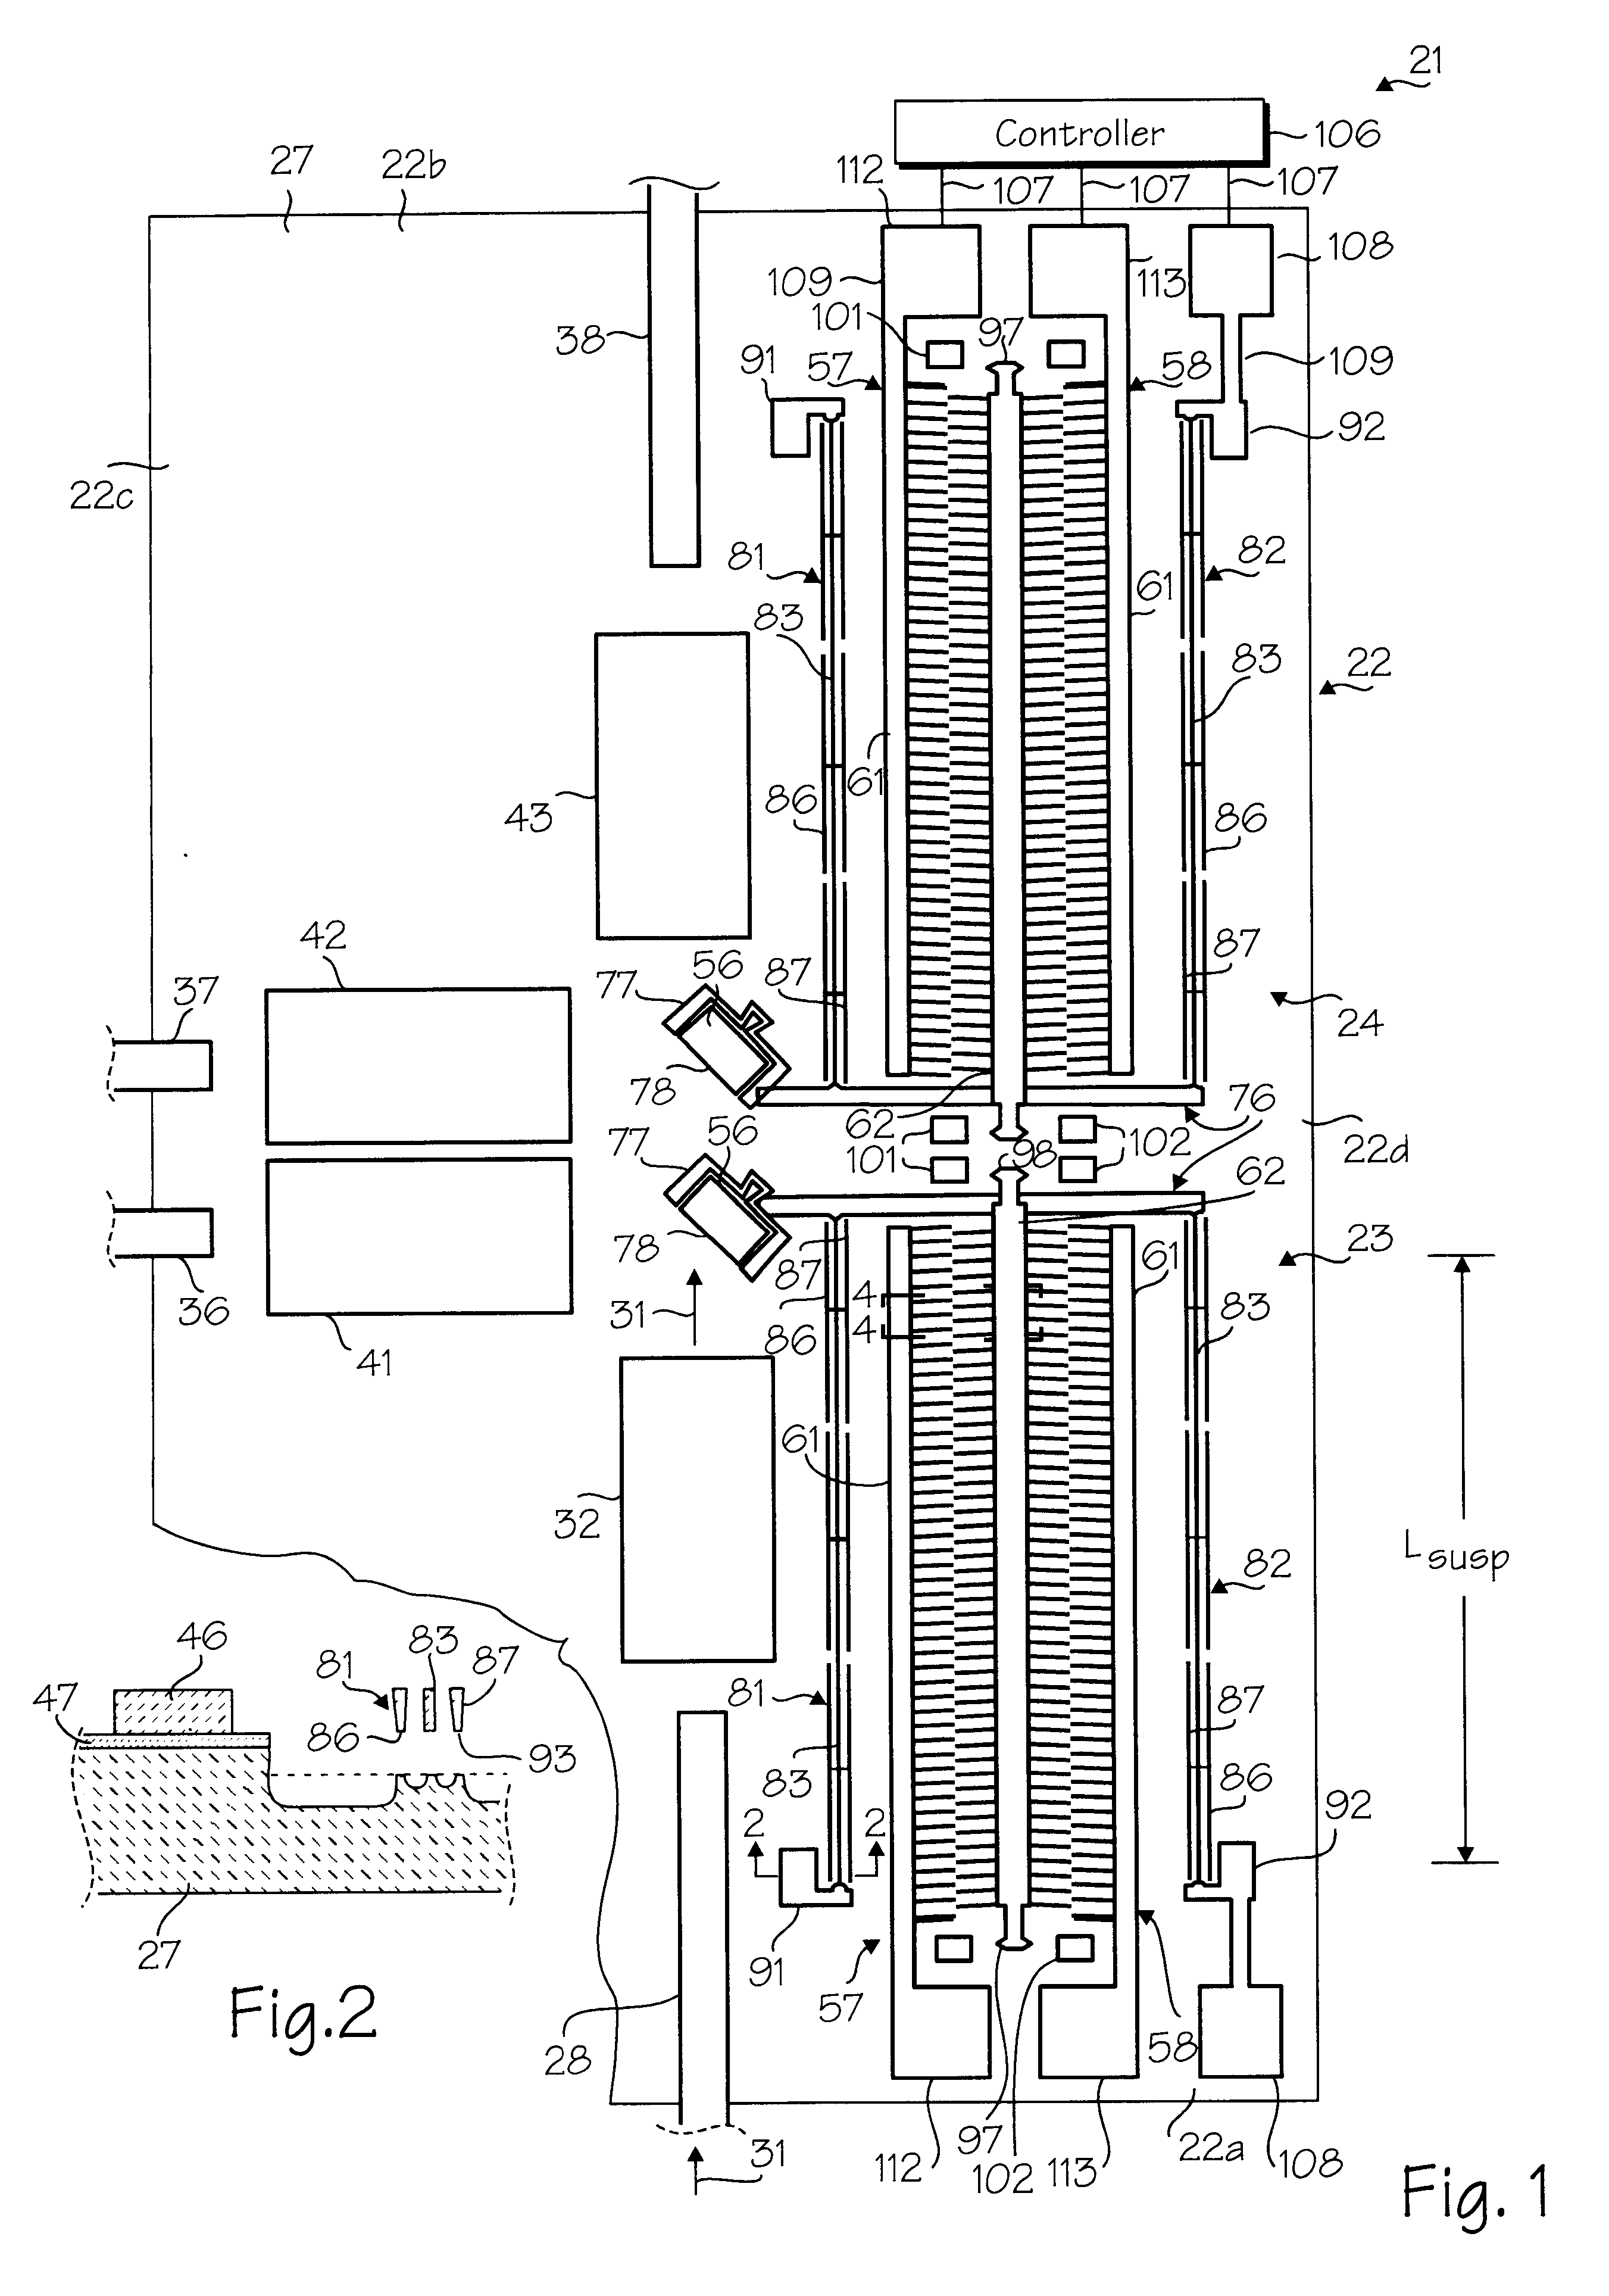 Electrostatic microactuator with offset and/or inclined comb drive fingers